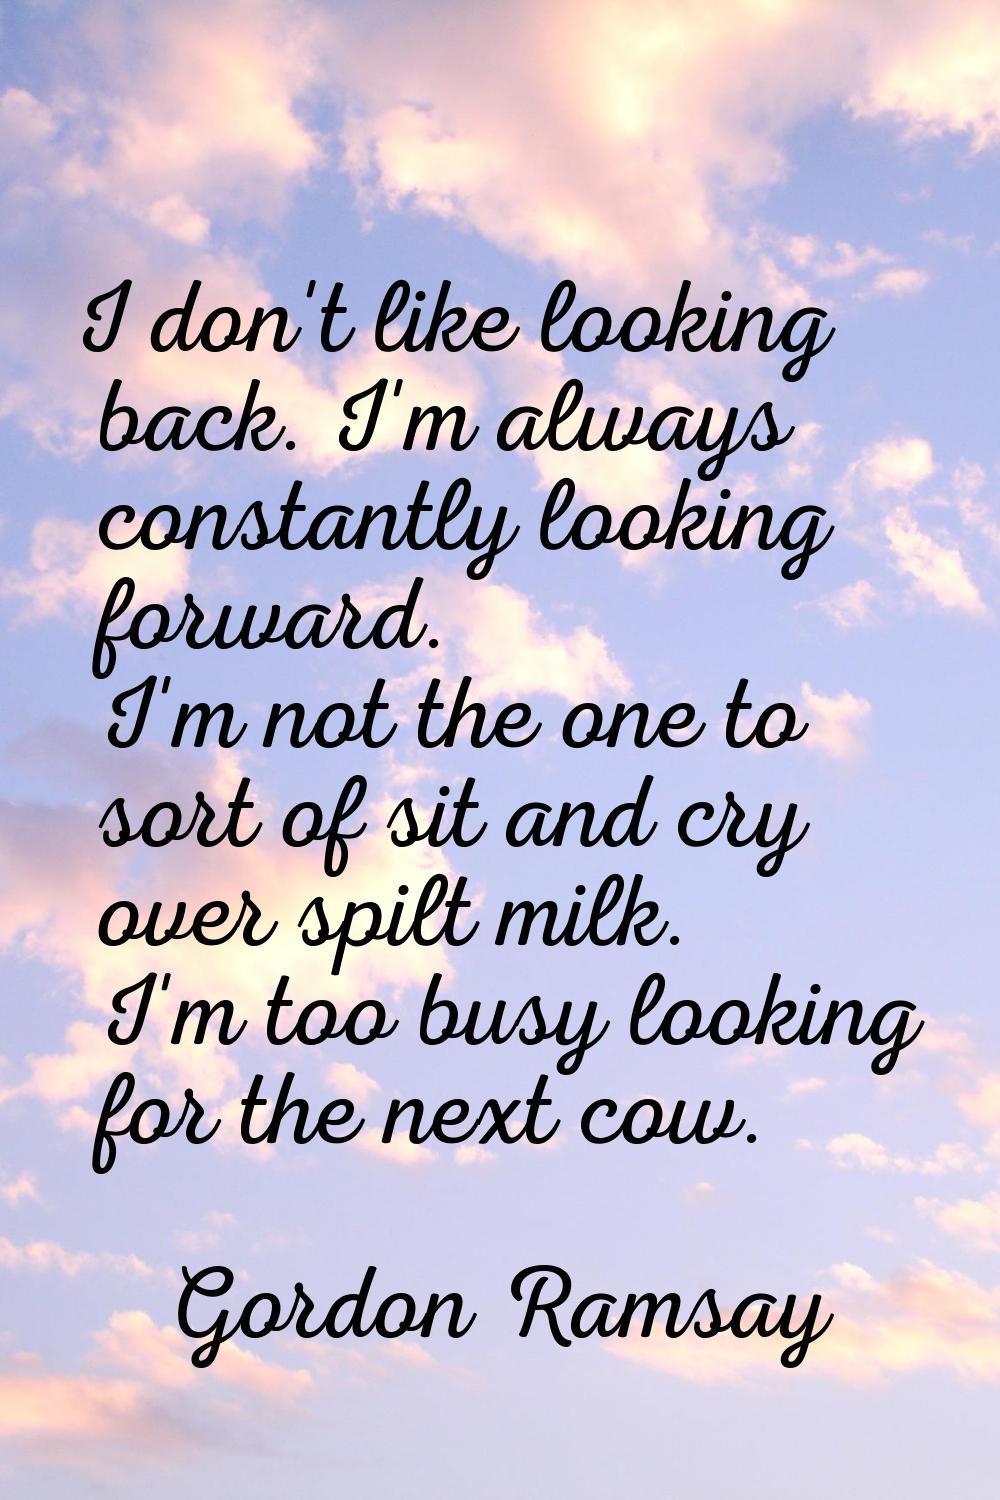 I don't like looking back. I'm always constantly looking forward. I'm not the one to sort of sit an